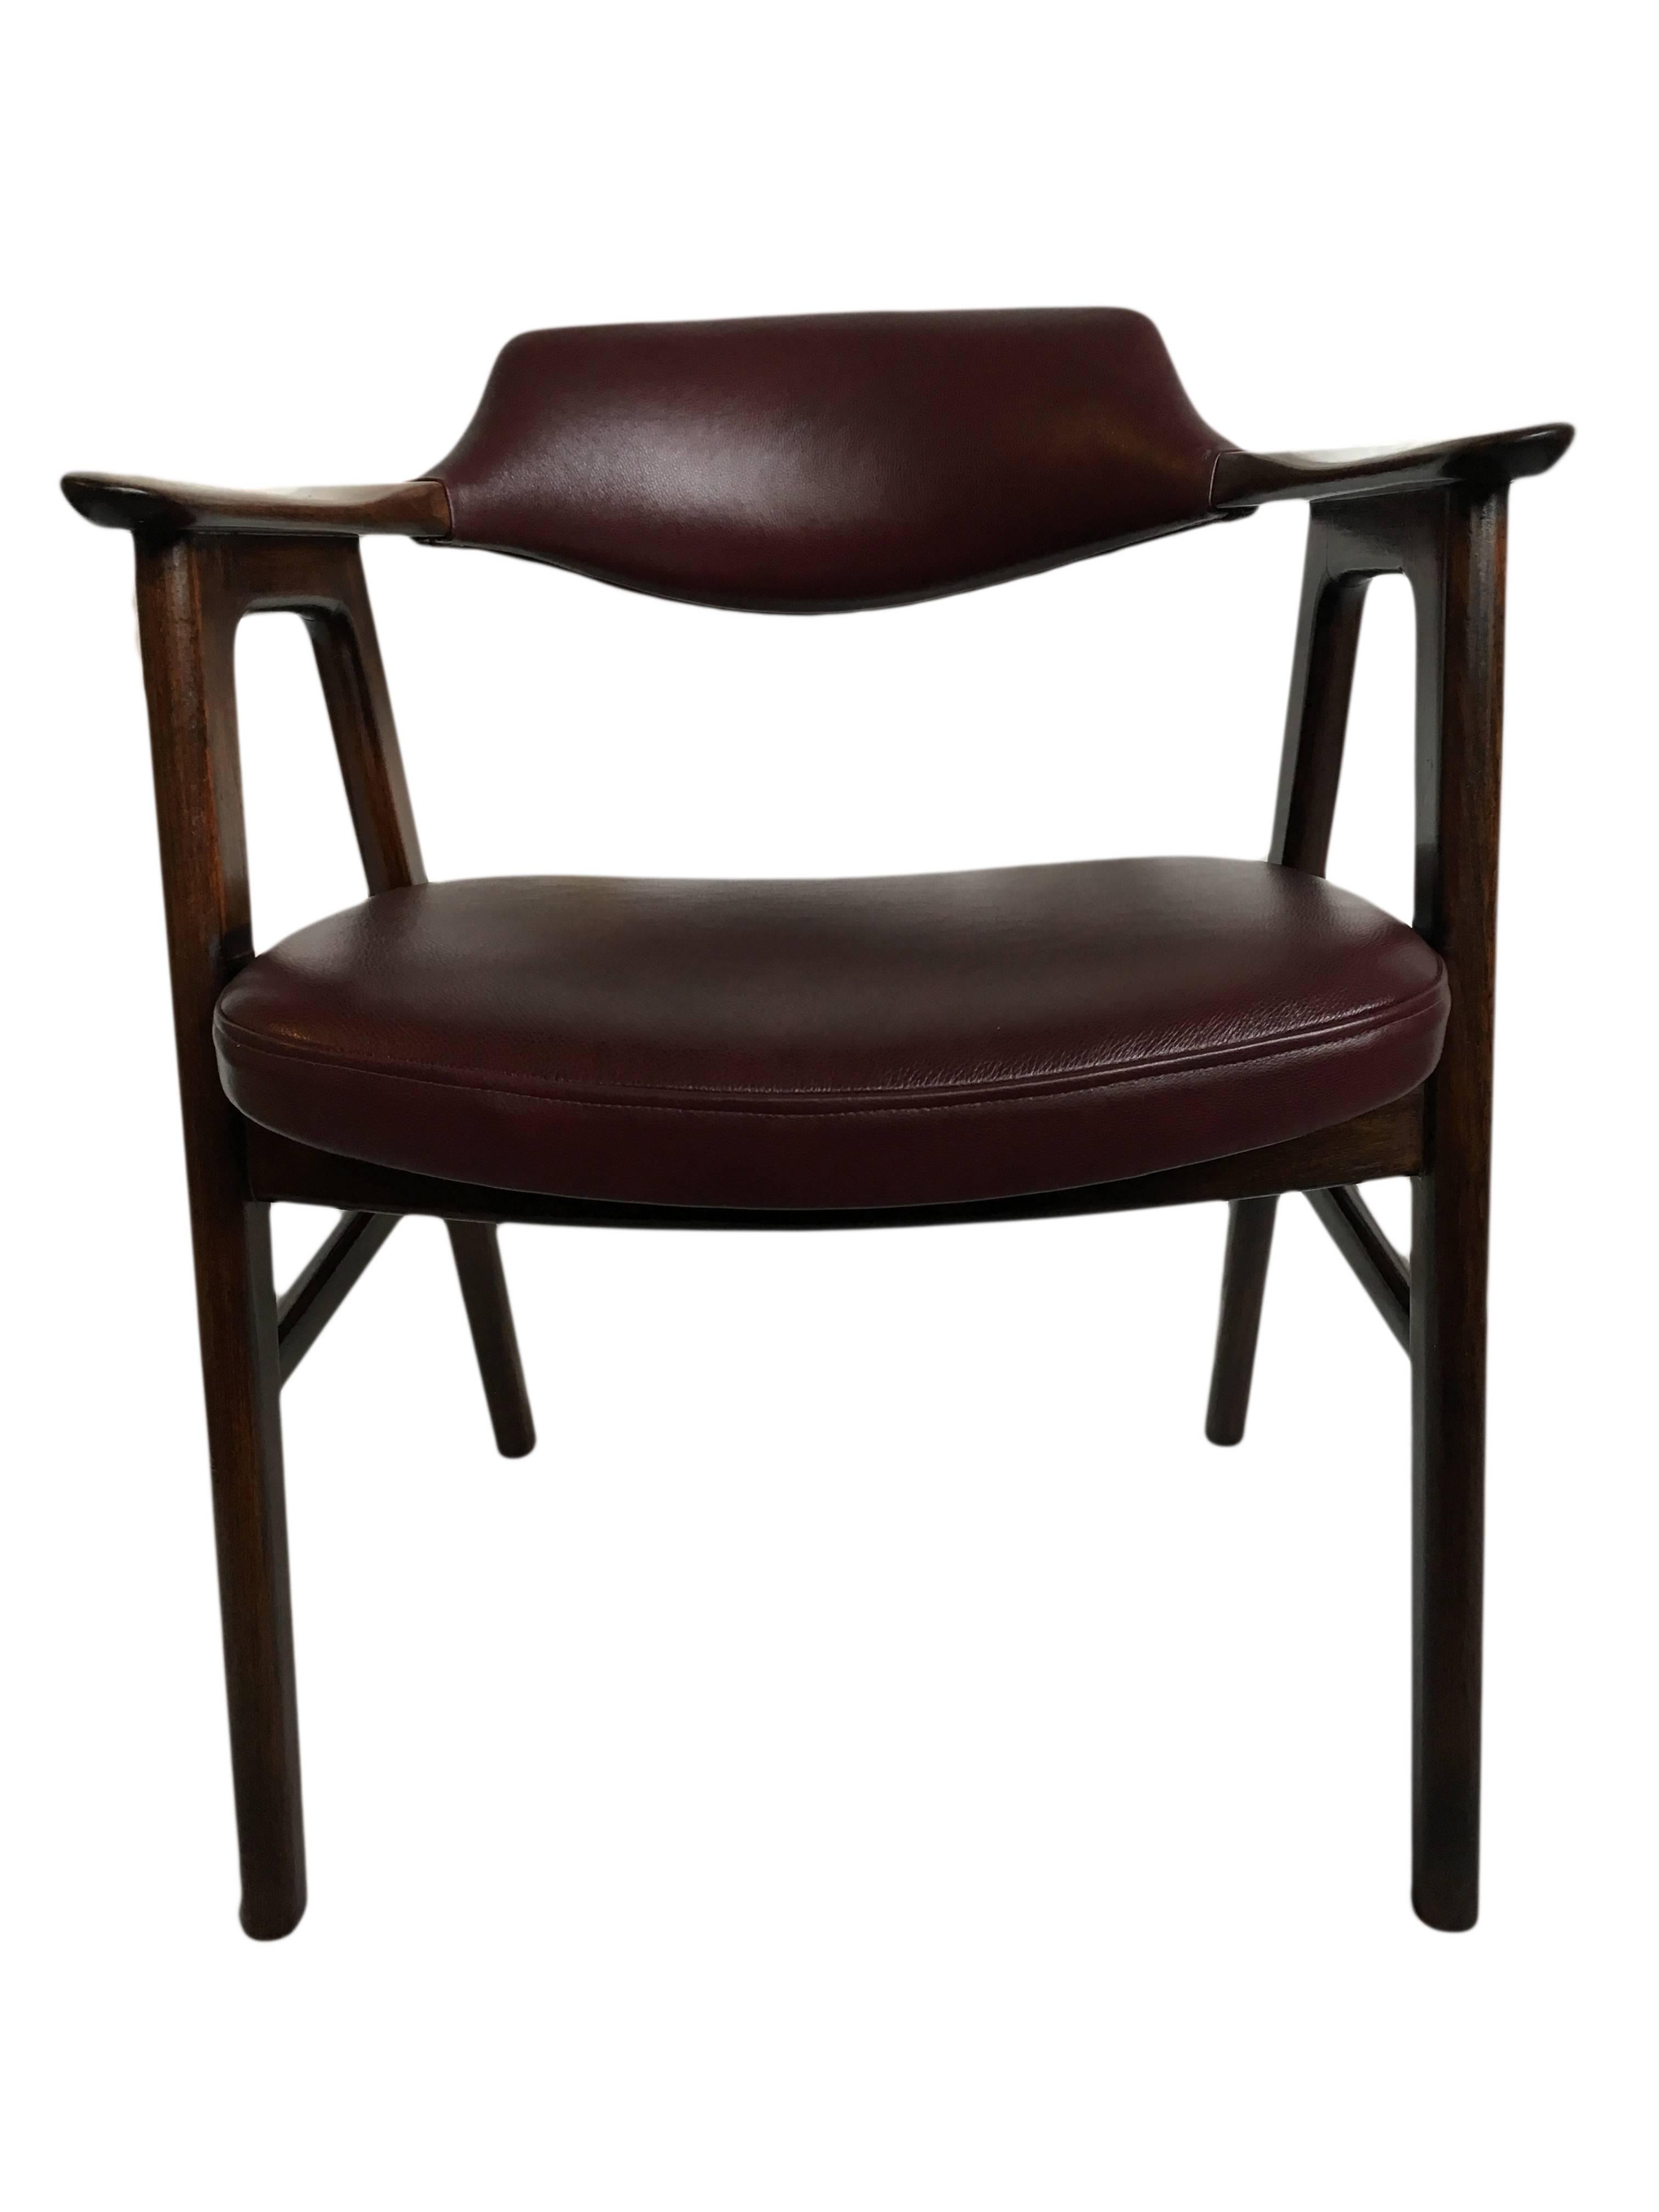 Erik Kirkegaard Rosewood and New Leather Chair 1